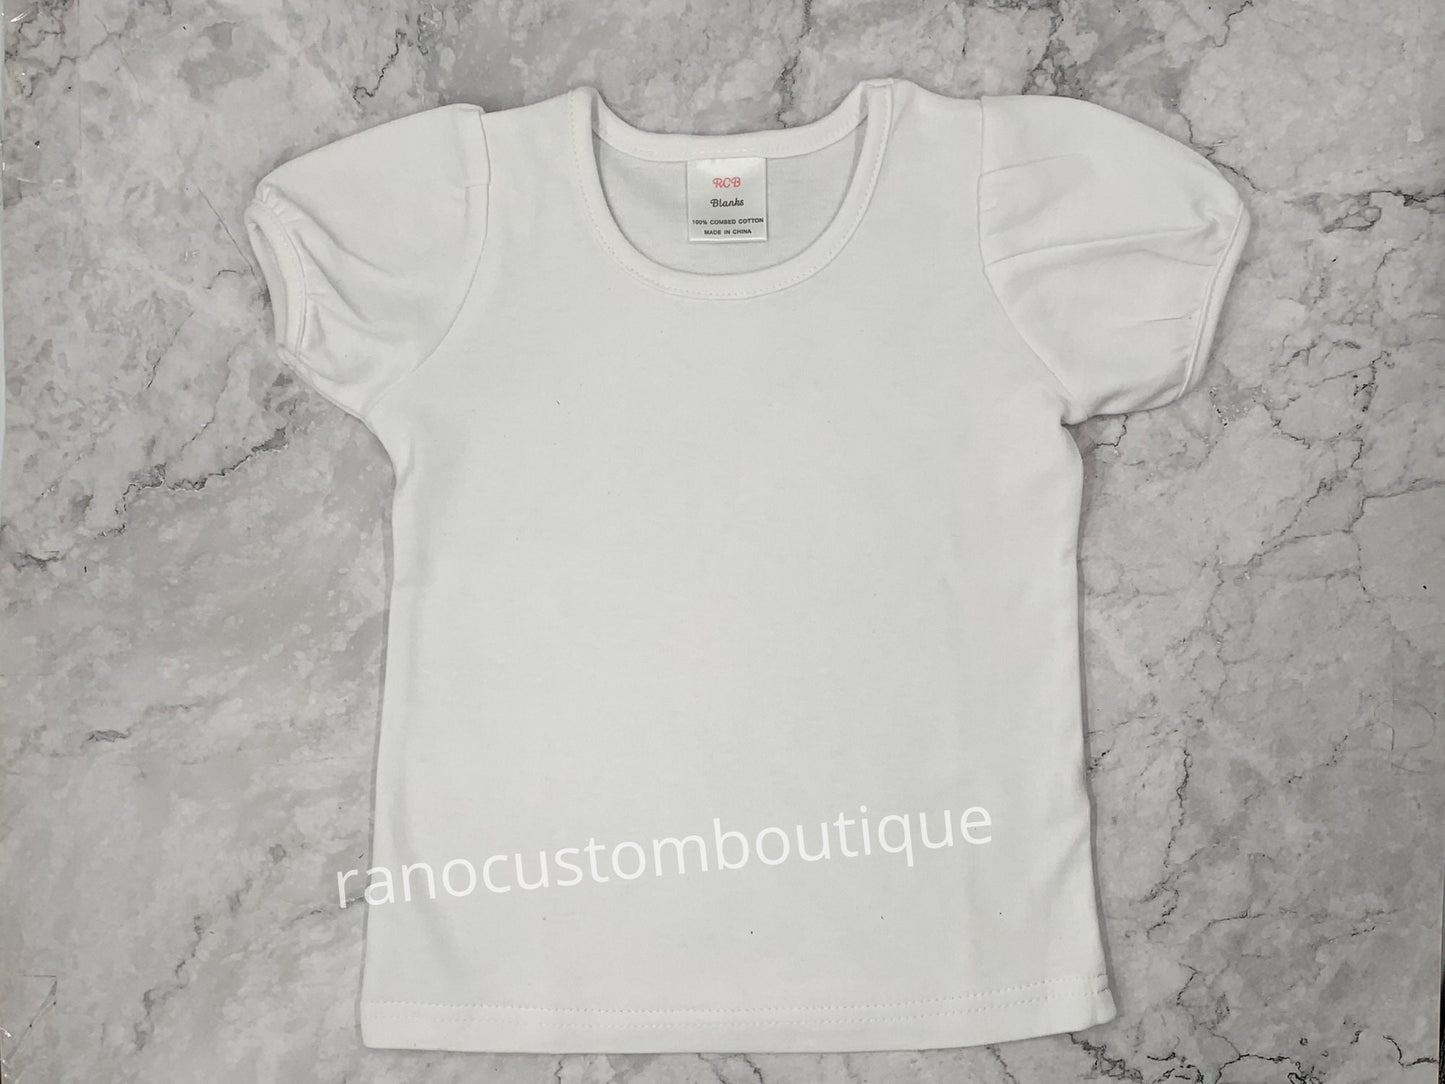 Embroidered Baby Girl Bodysuit, Embroidered Design, Embroidered Baby Clothing, Girl's Clothing